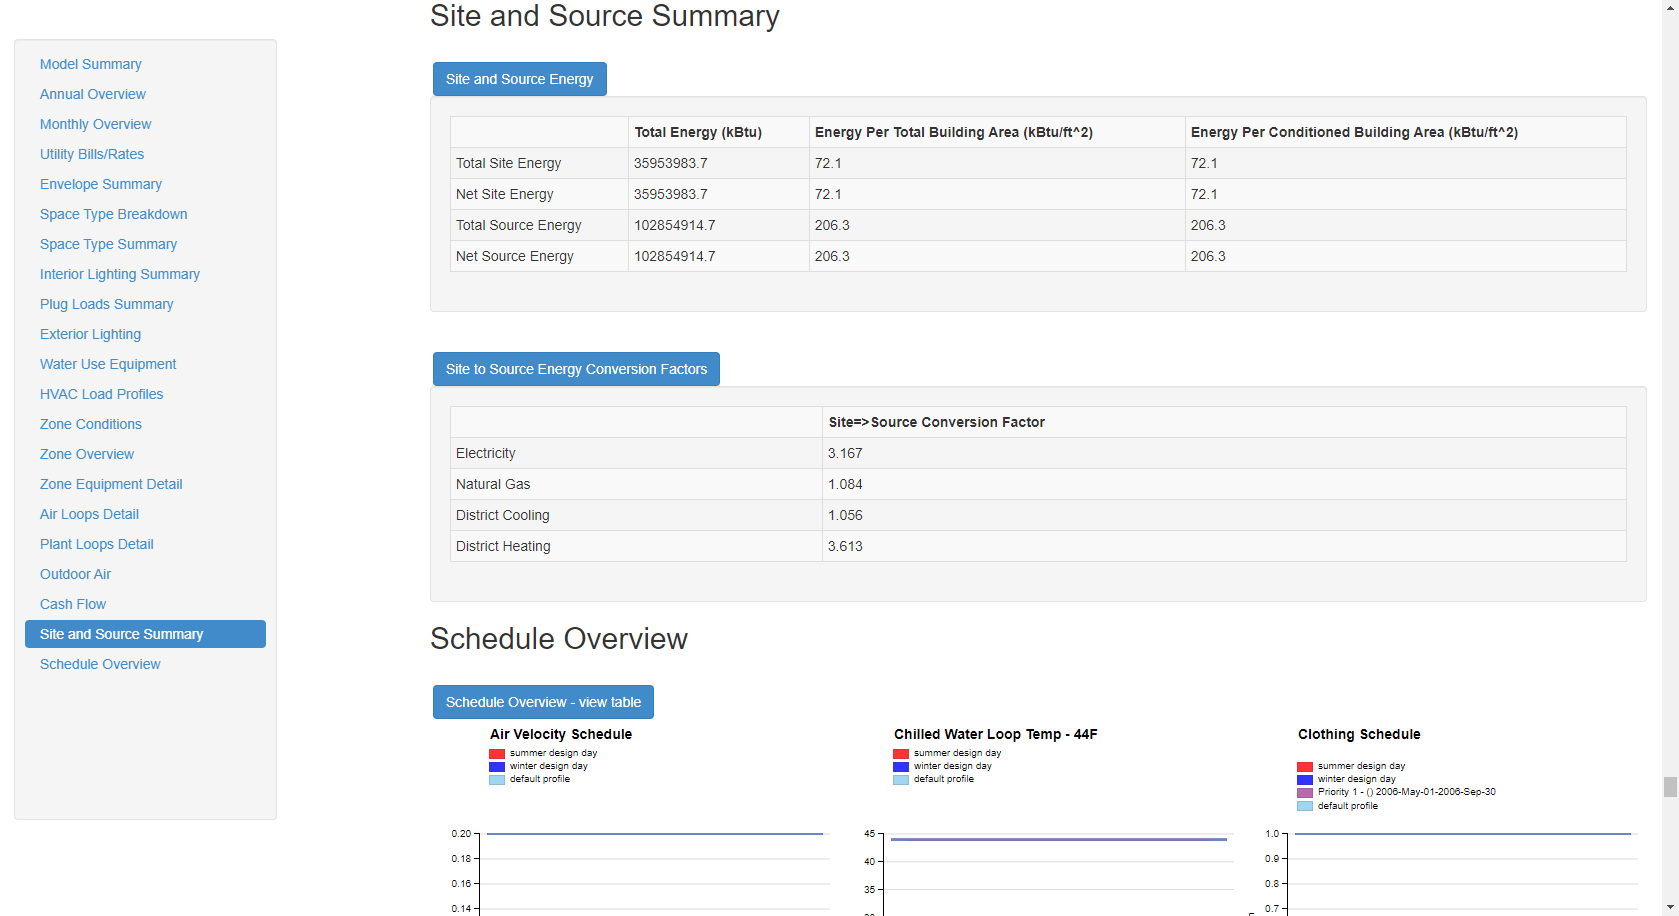 Site and Source Summary section